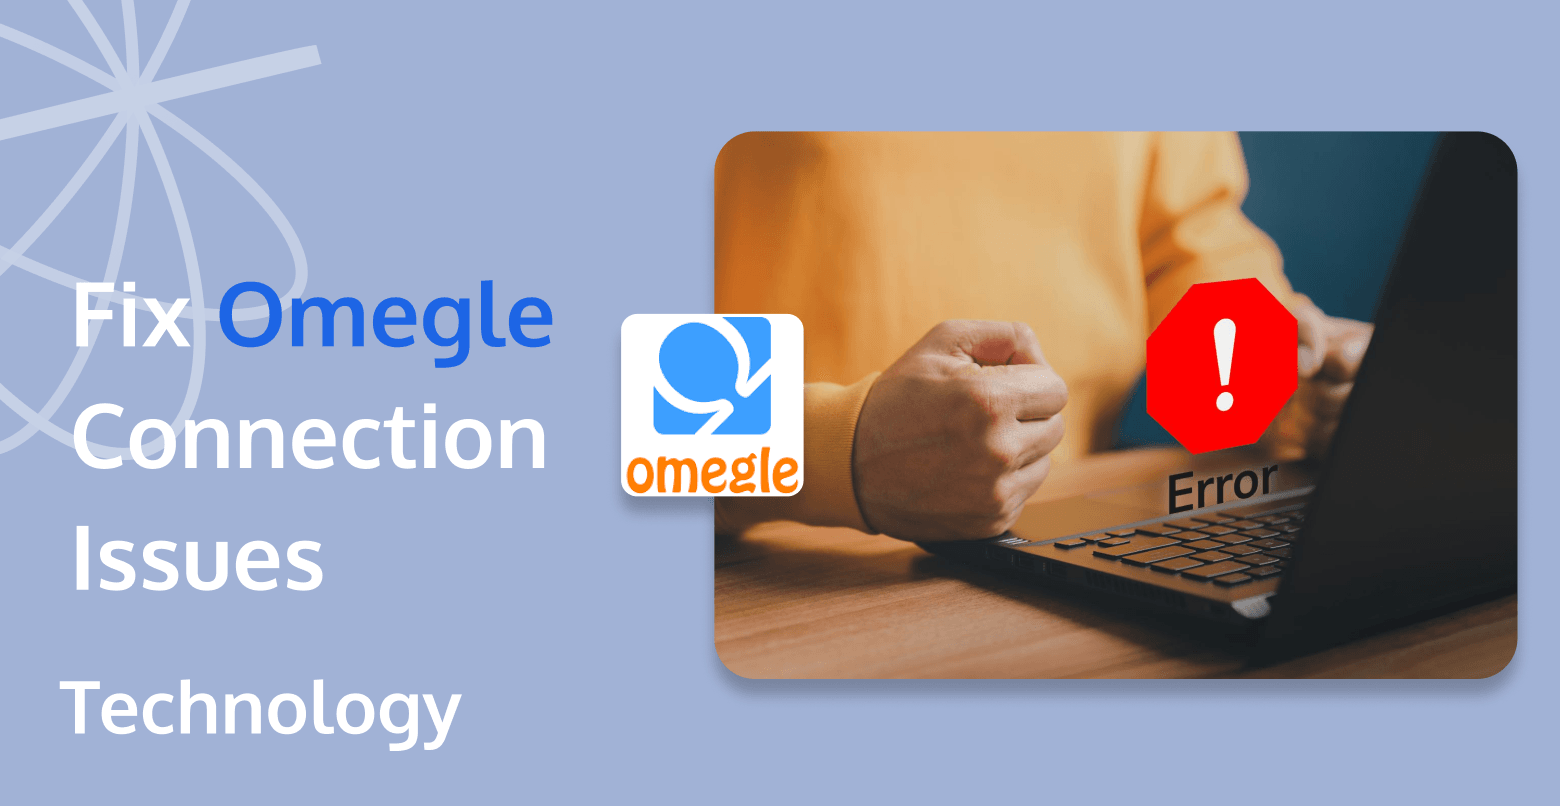 How to Resolve Omegle Error Connecting to Server Issues Effectively?